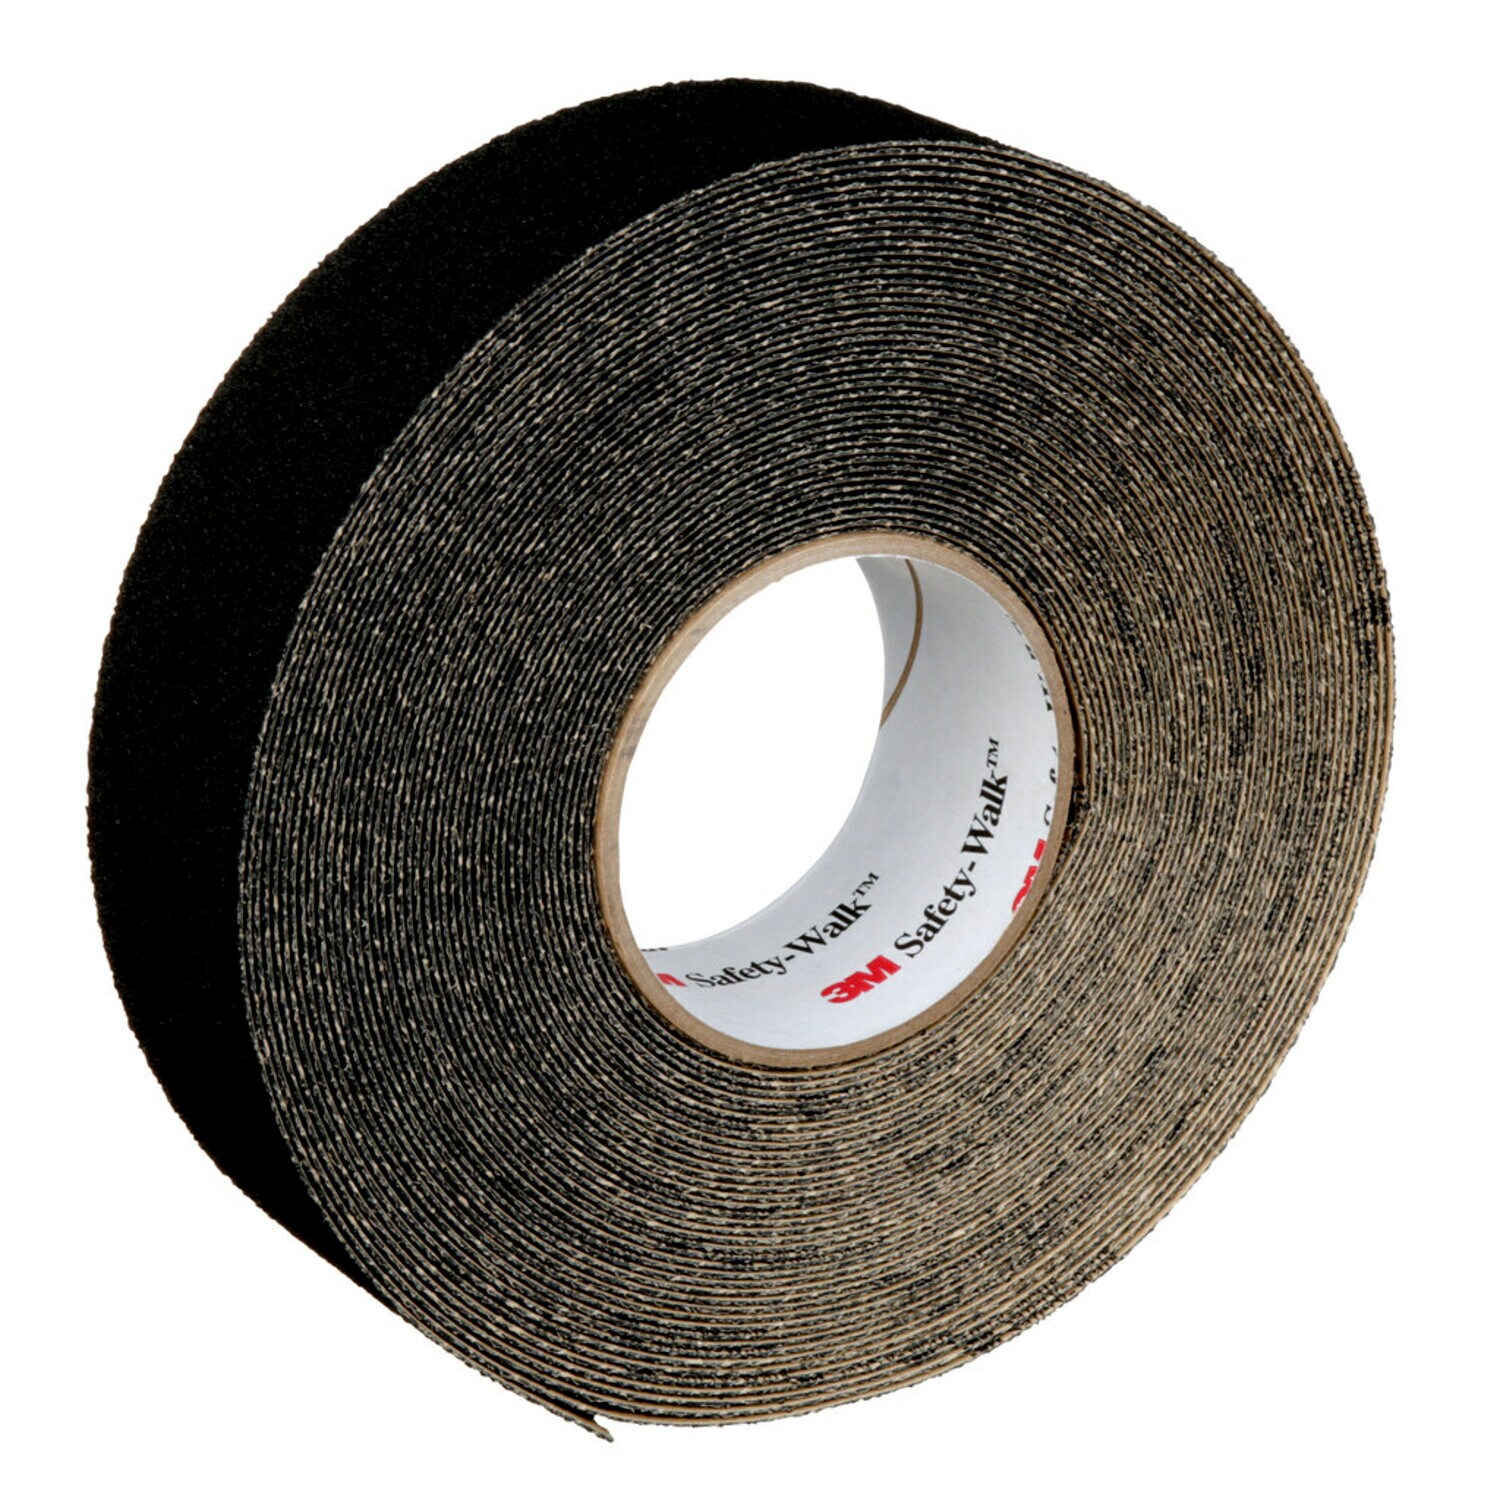 7000001994 - 3M Safety-Walk Slip-Resistant Medium Resilient Tapes & Treads 310,
Black, 2 in x 60 ft, Roll, 2/Case